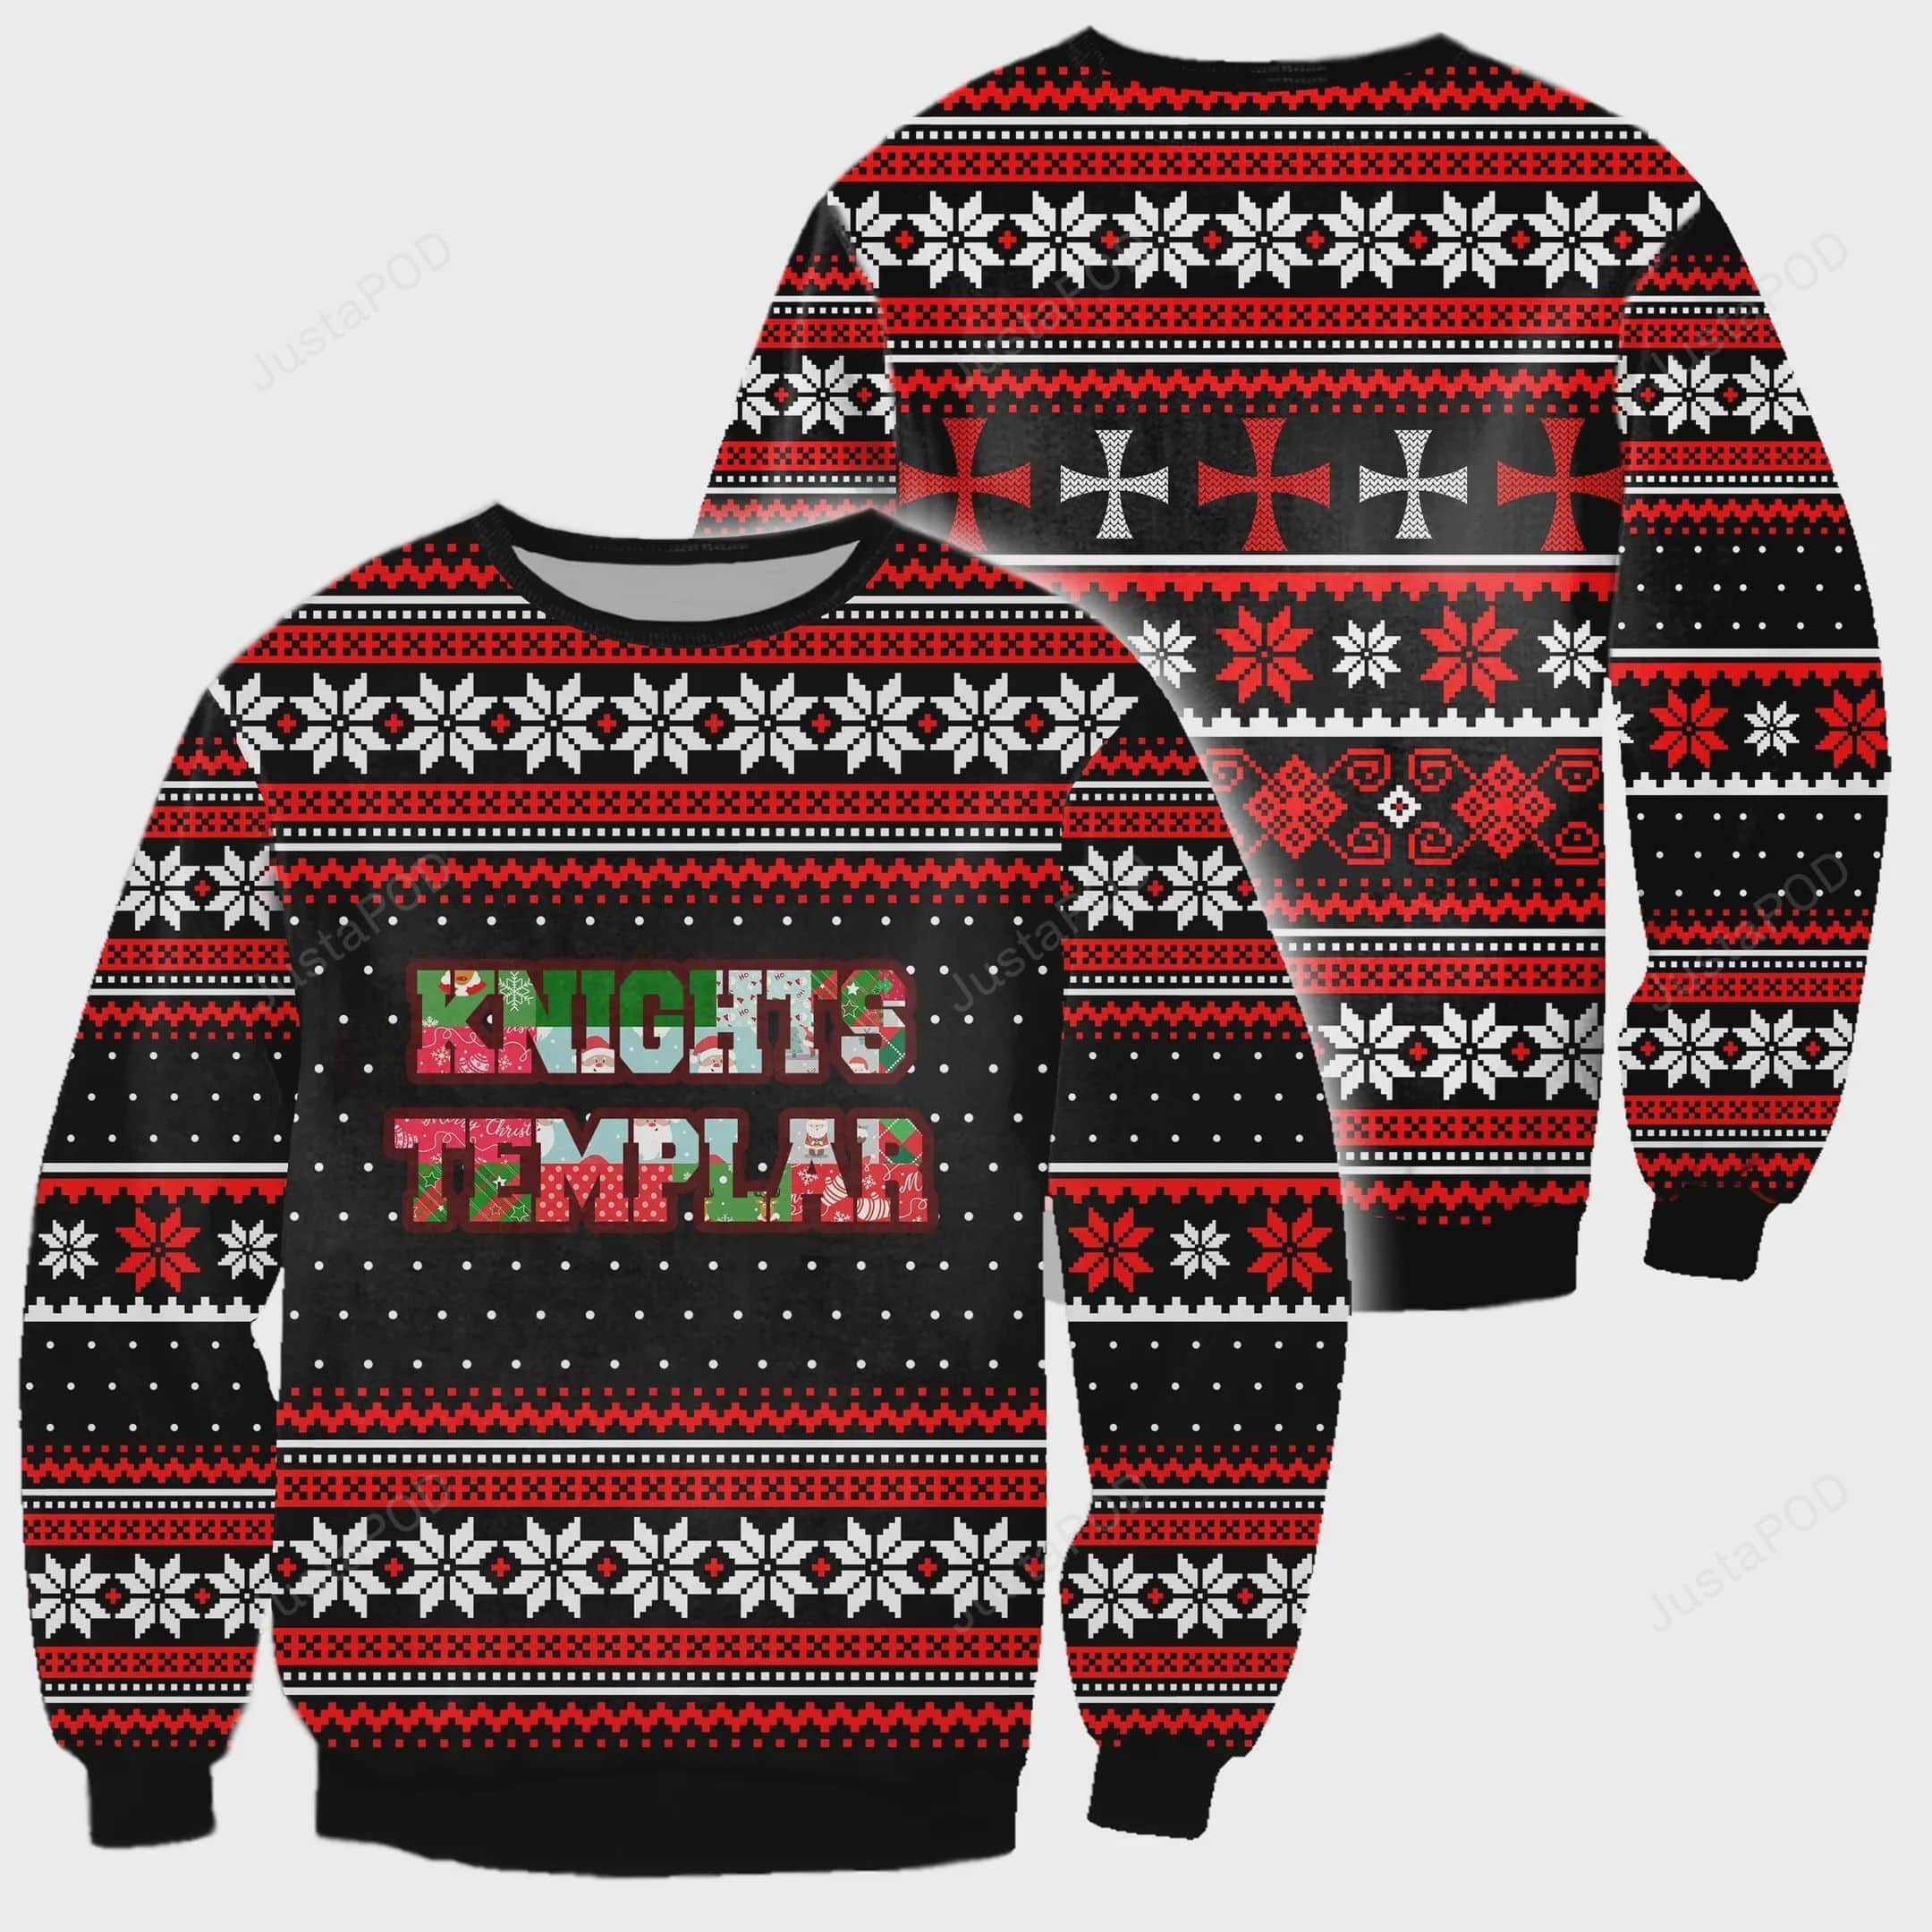 HF Knights Templar All-Over Print Christmas Cold Weather Sweater Shirt ...